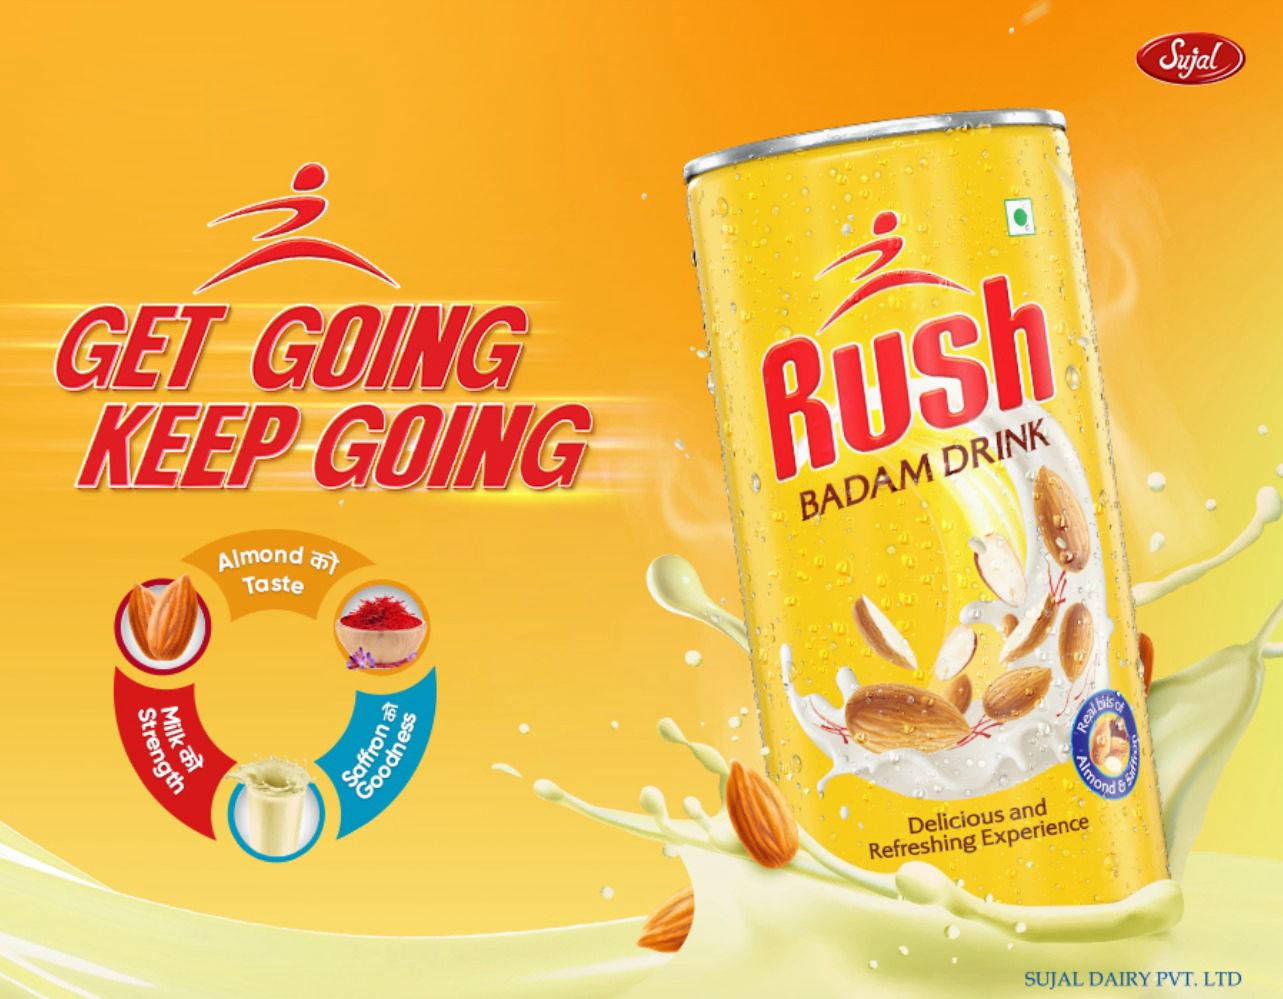 Sujal Dairy launches RUSH BADAM DRINK